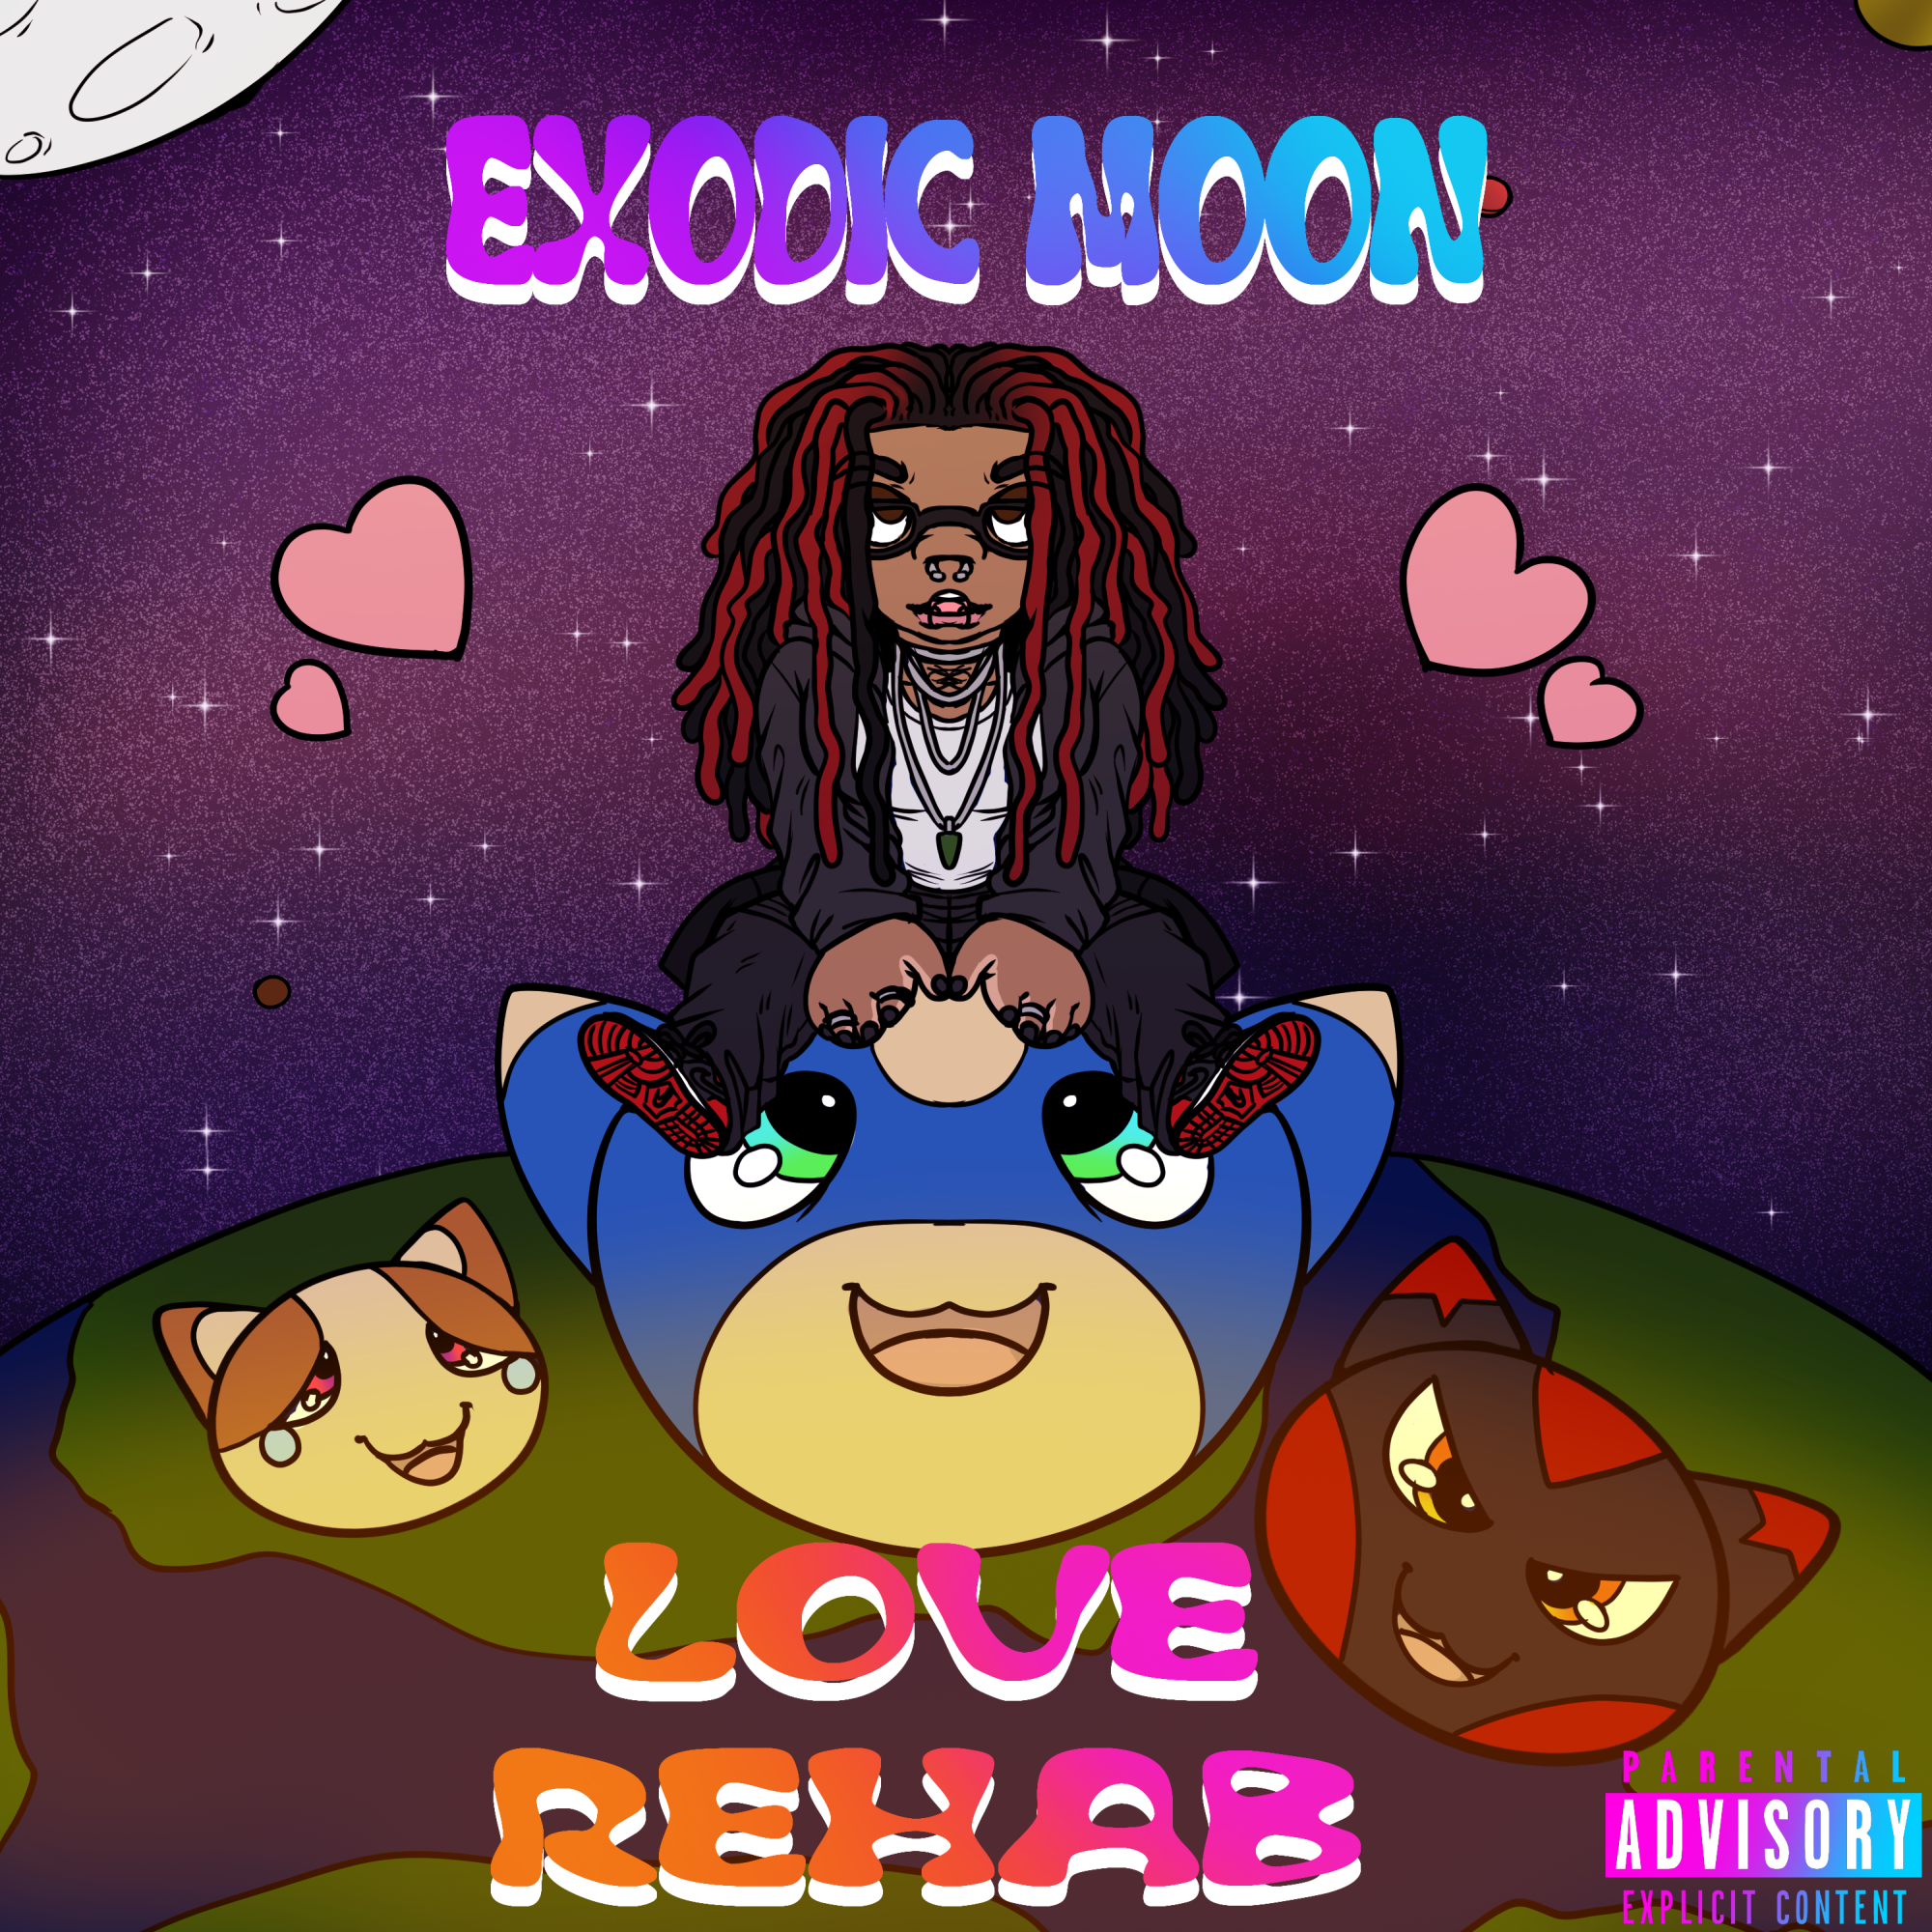 Art for LOVE REHAB by Exodic Moon